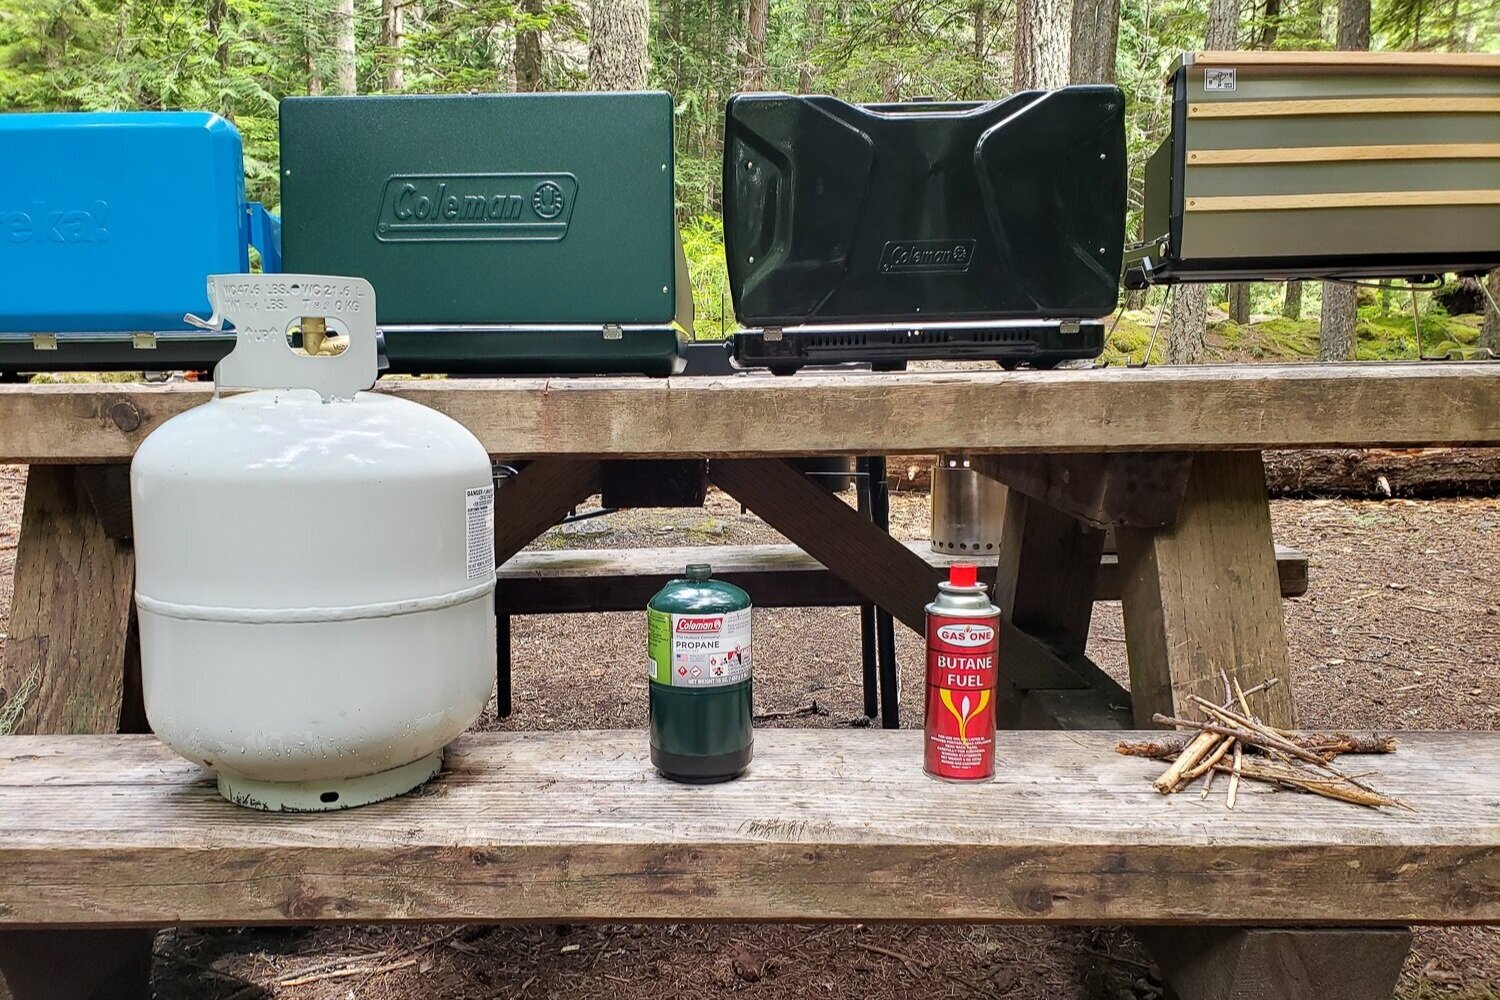 Comparing stove fuel: A 20 lb. propane tank, a 1 lb. propane canister, a butane canister, and foraged wood